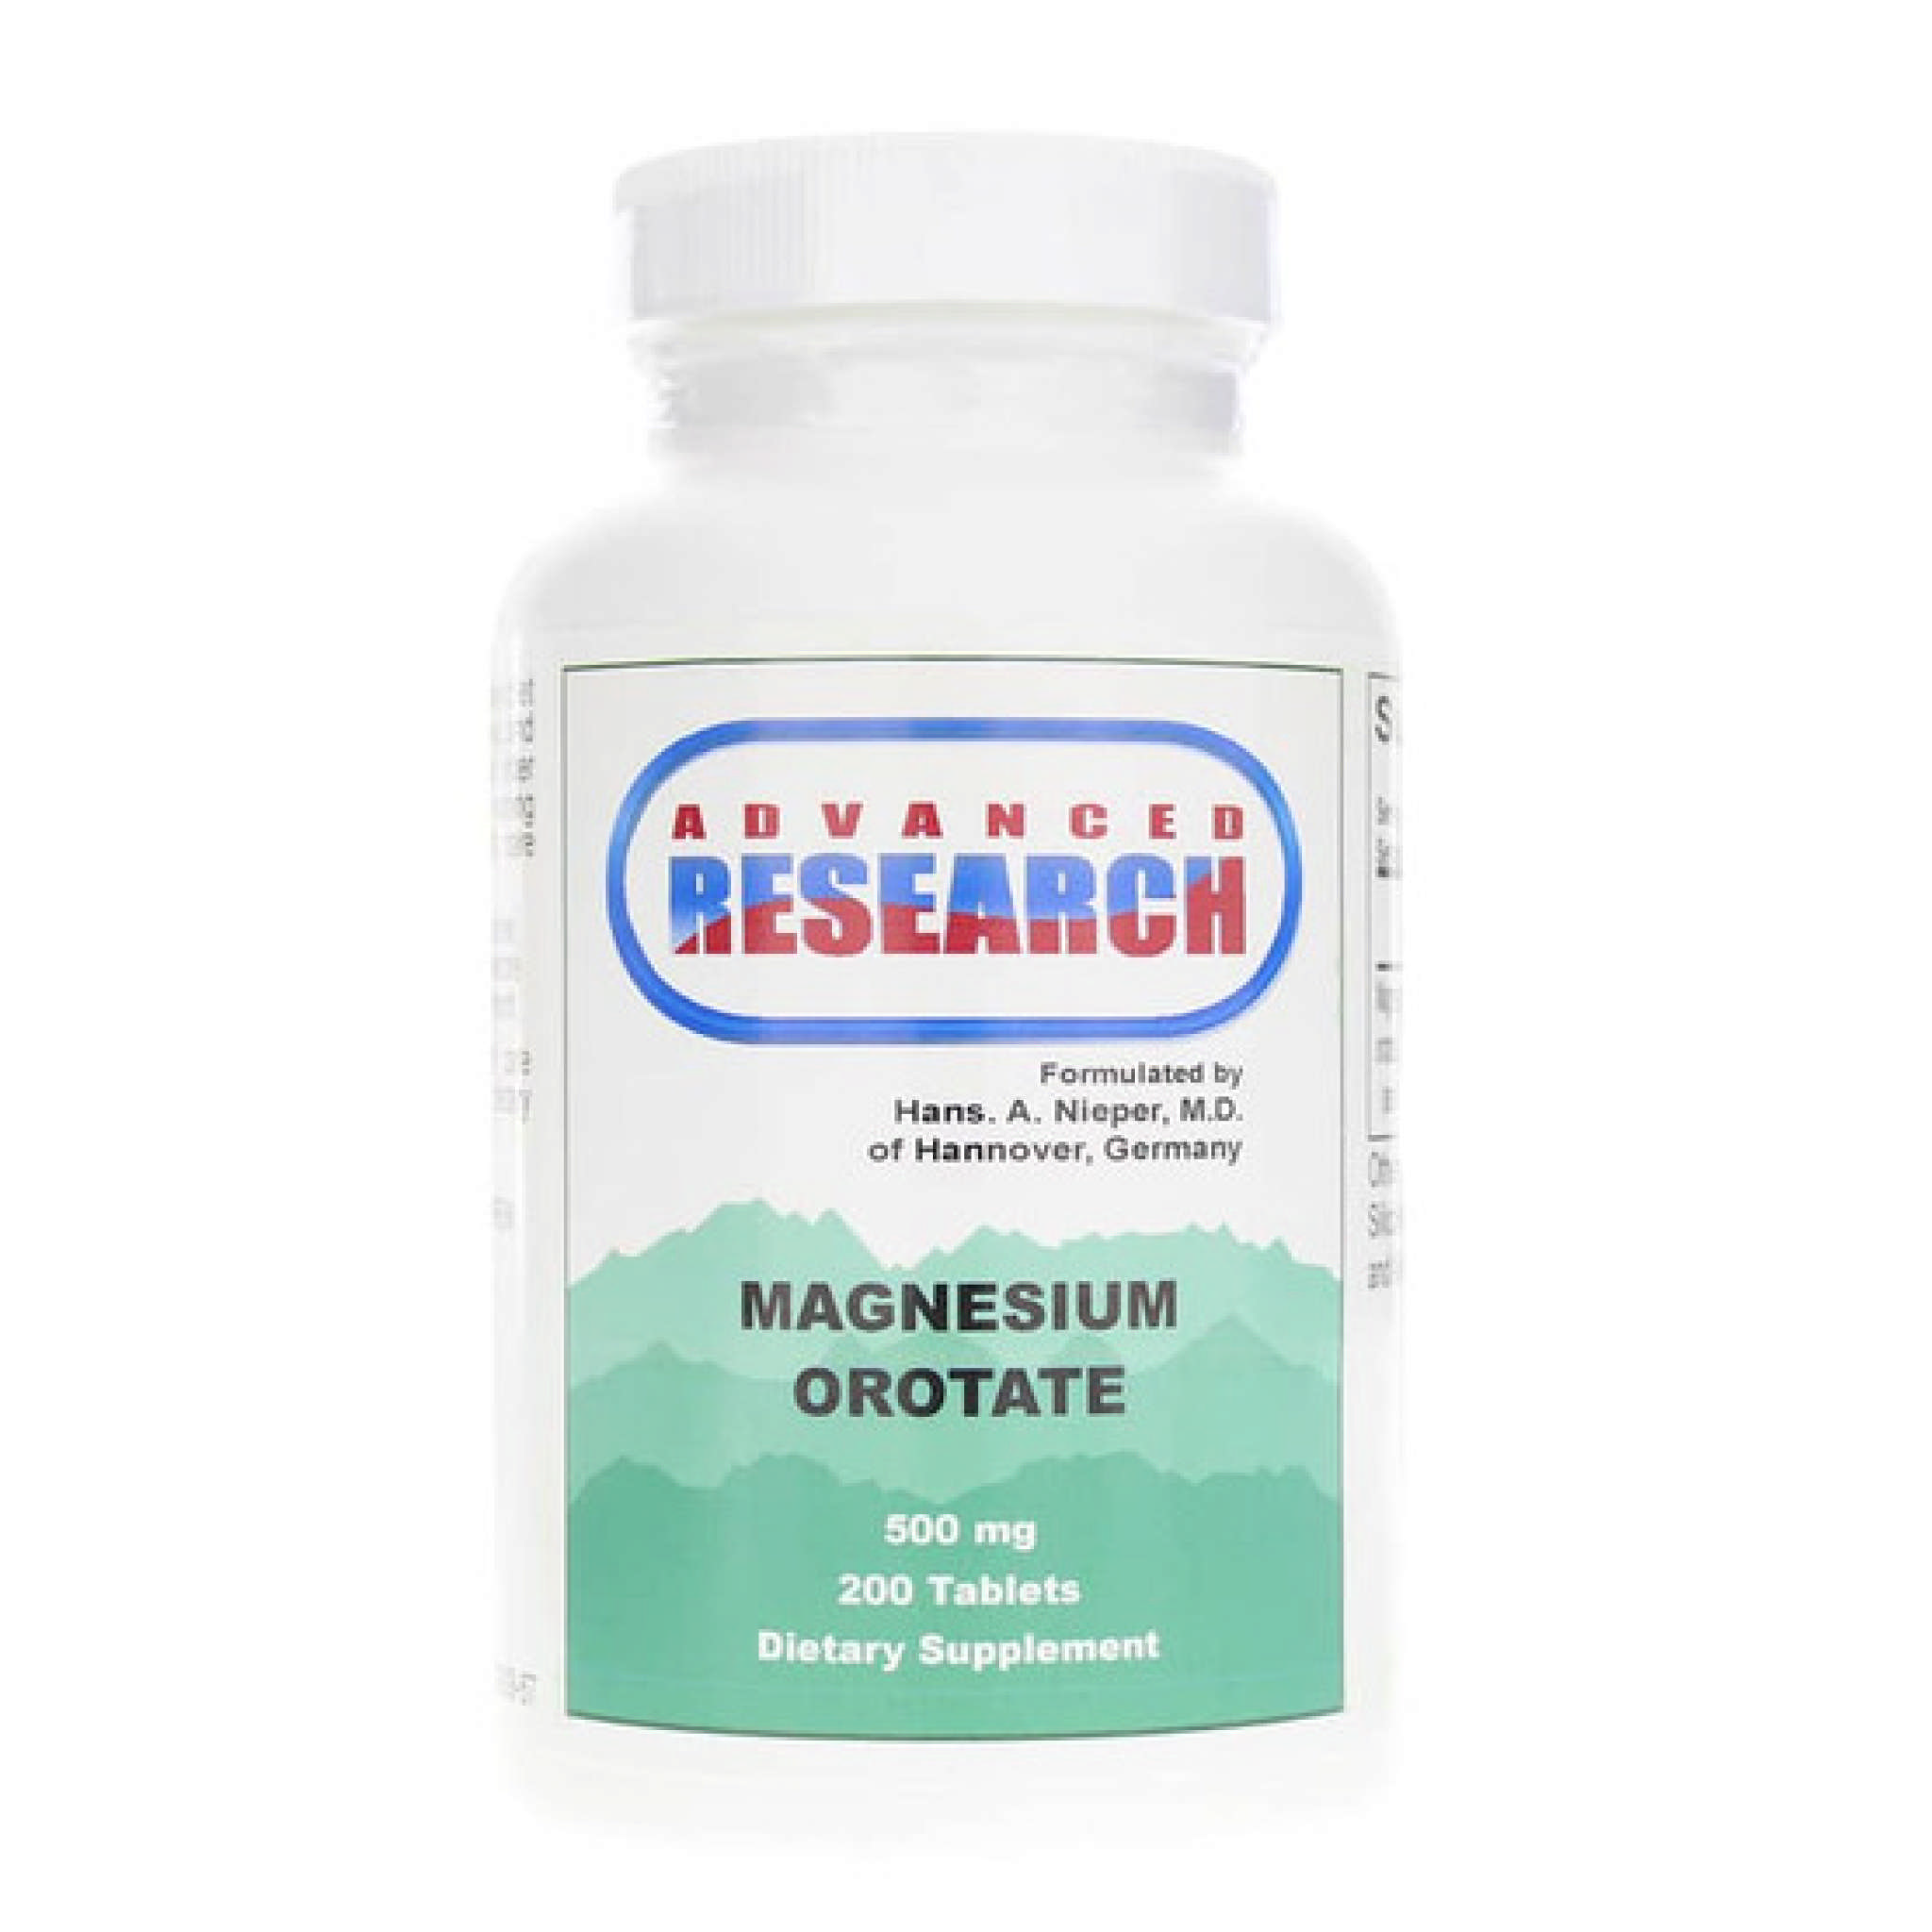 Advanced Research - Magnesium Orotate 500 mg